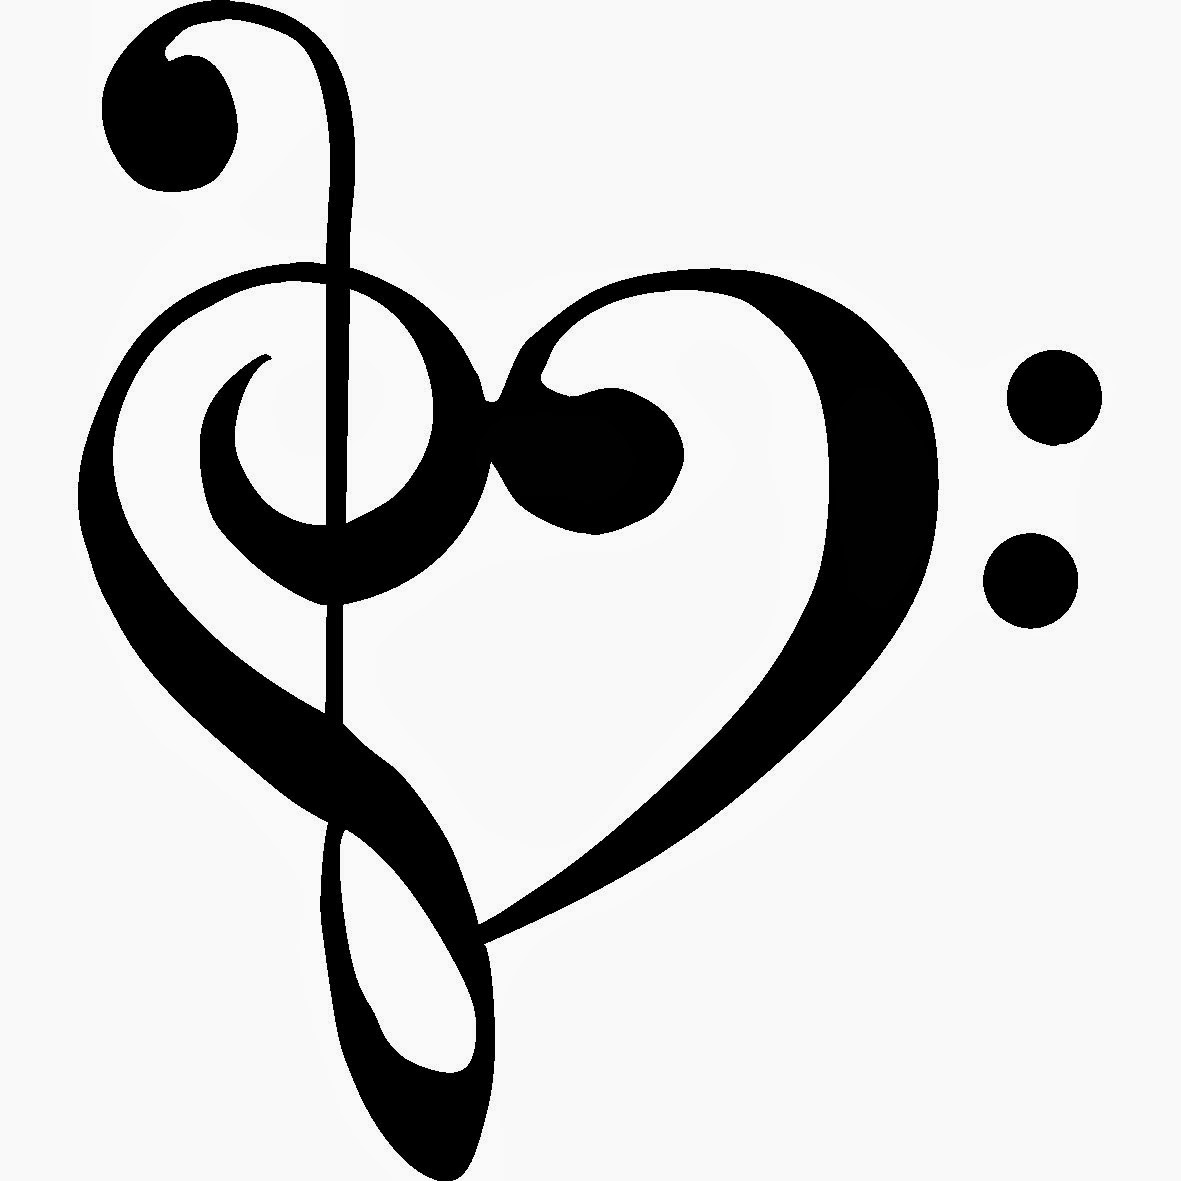 Music Notes Heart Wallpaper   Clipart Panda   Free Clipart Images